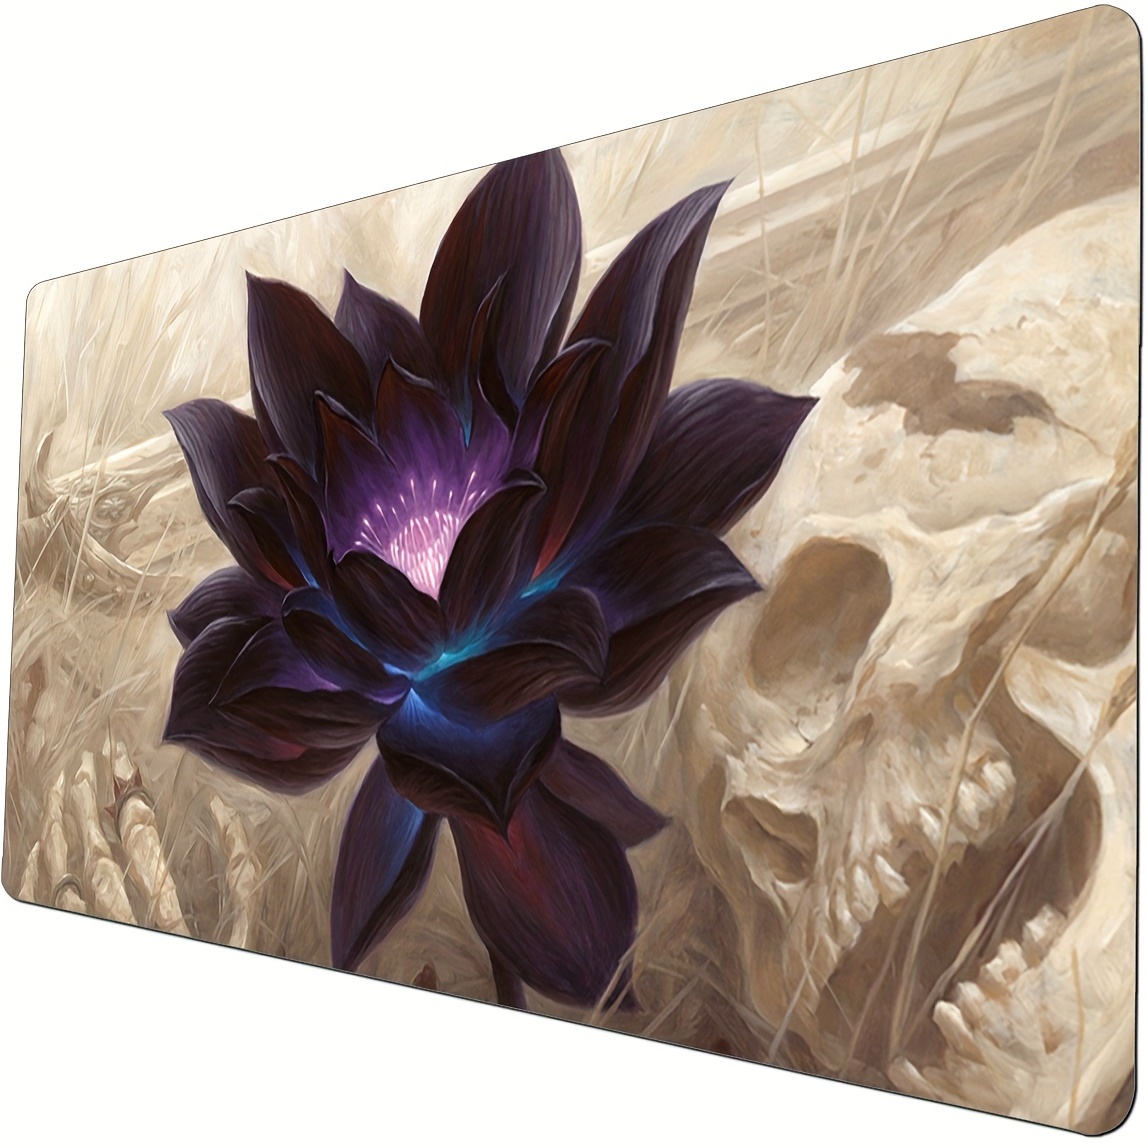 

1pc Dark Lotus Mouse Pad Deskt Mat Large Computer Keyboard Pad Anime Game Mouse Pad Board And Card Game Pad Tcg Playmat Table Mats Compatible For Mtg Rpg Ccg Trading Card Game Play Mats 12+